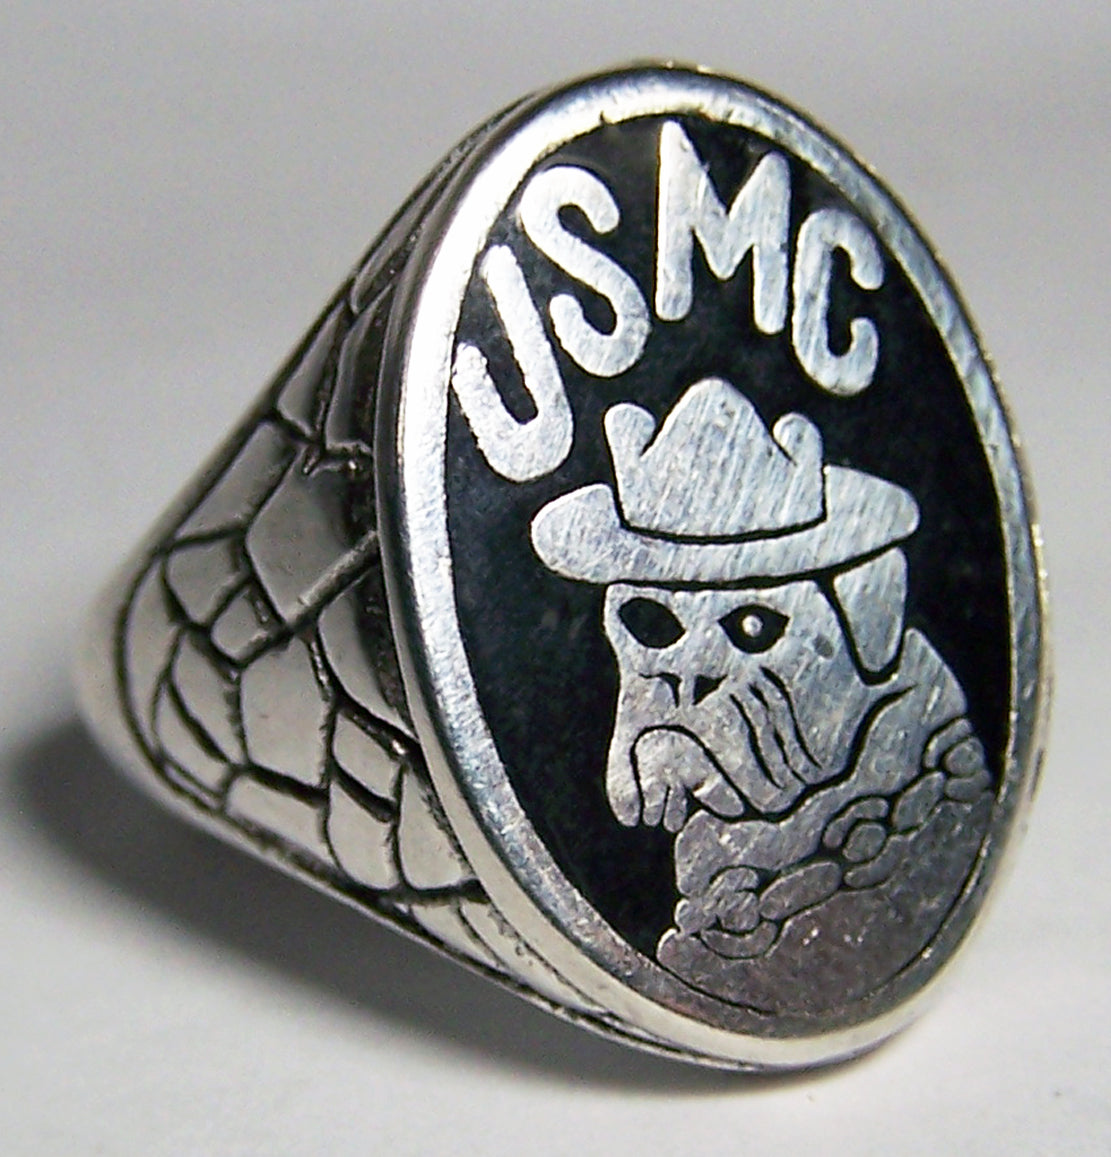 Wholesale USMC BULLDOG US MARINES SILVER DELUXE BIKER RING (Sold by the piece) *